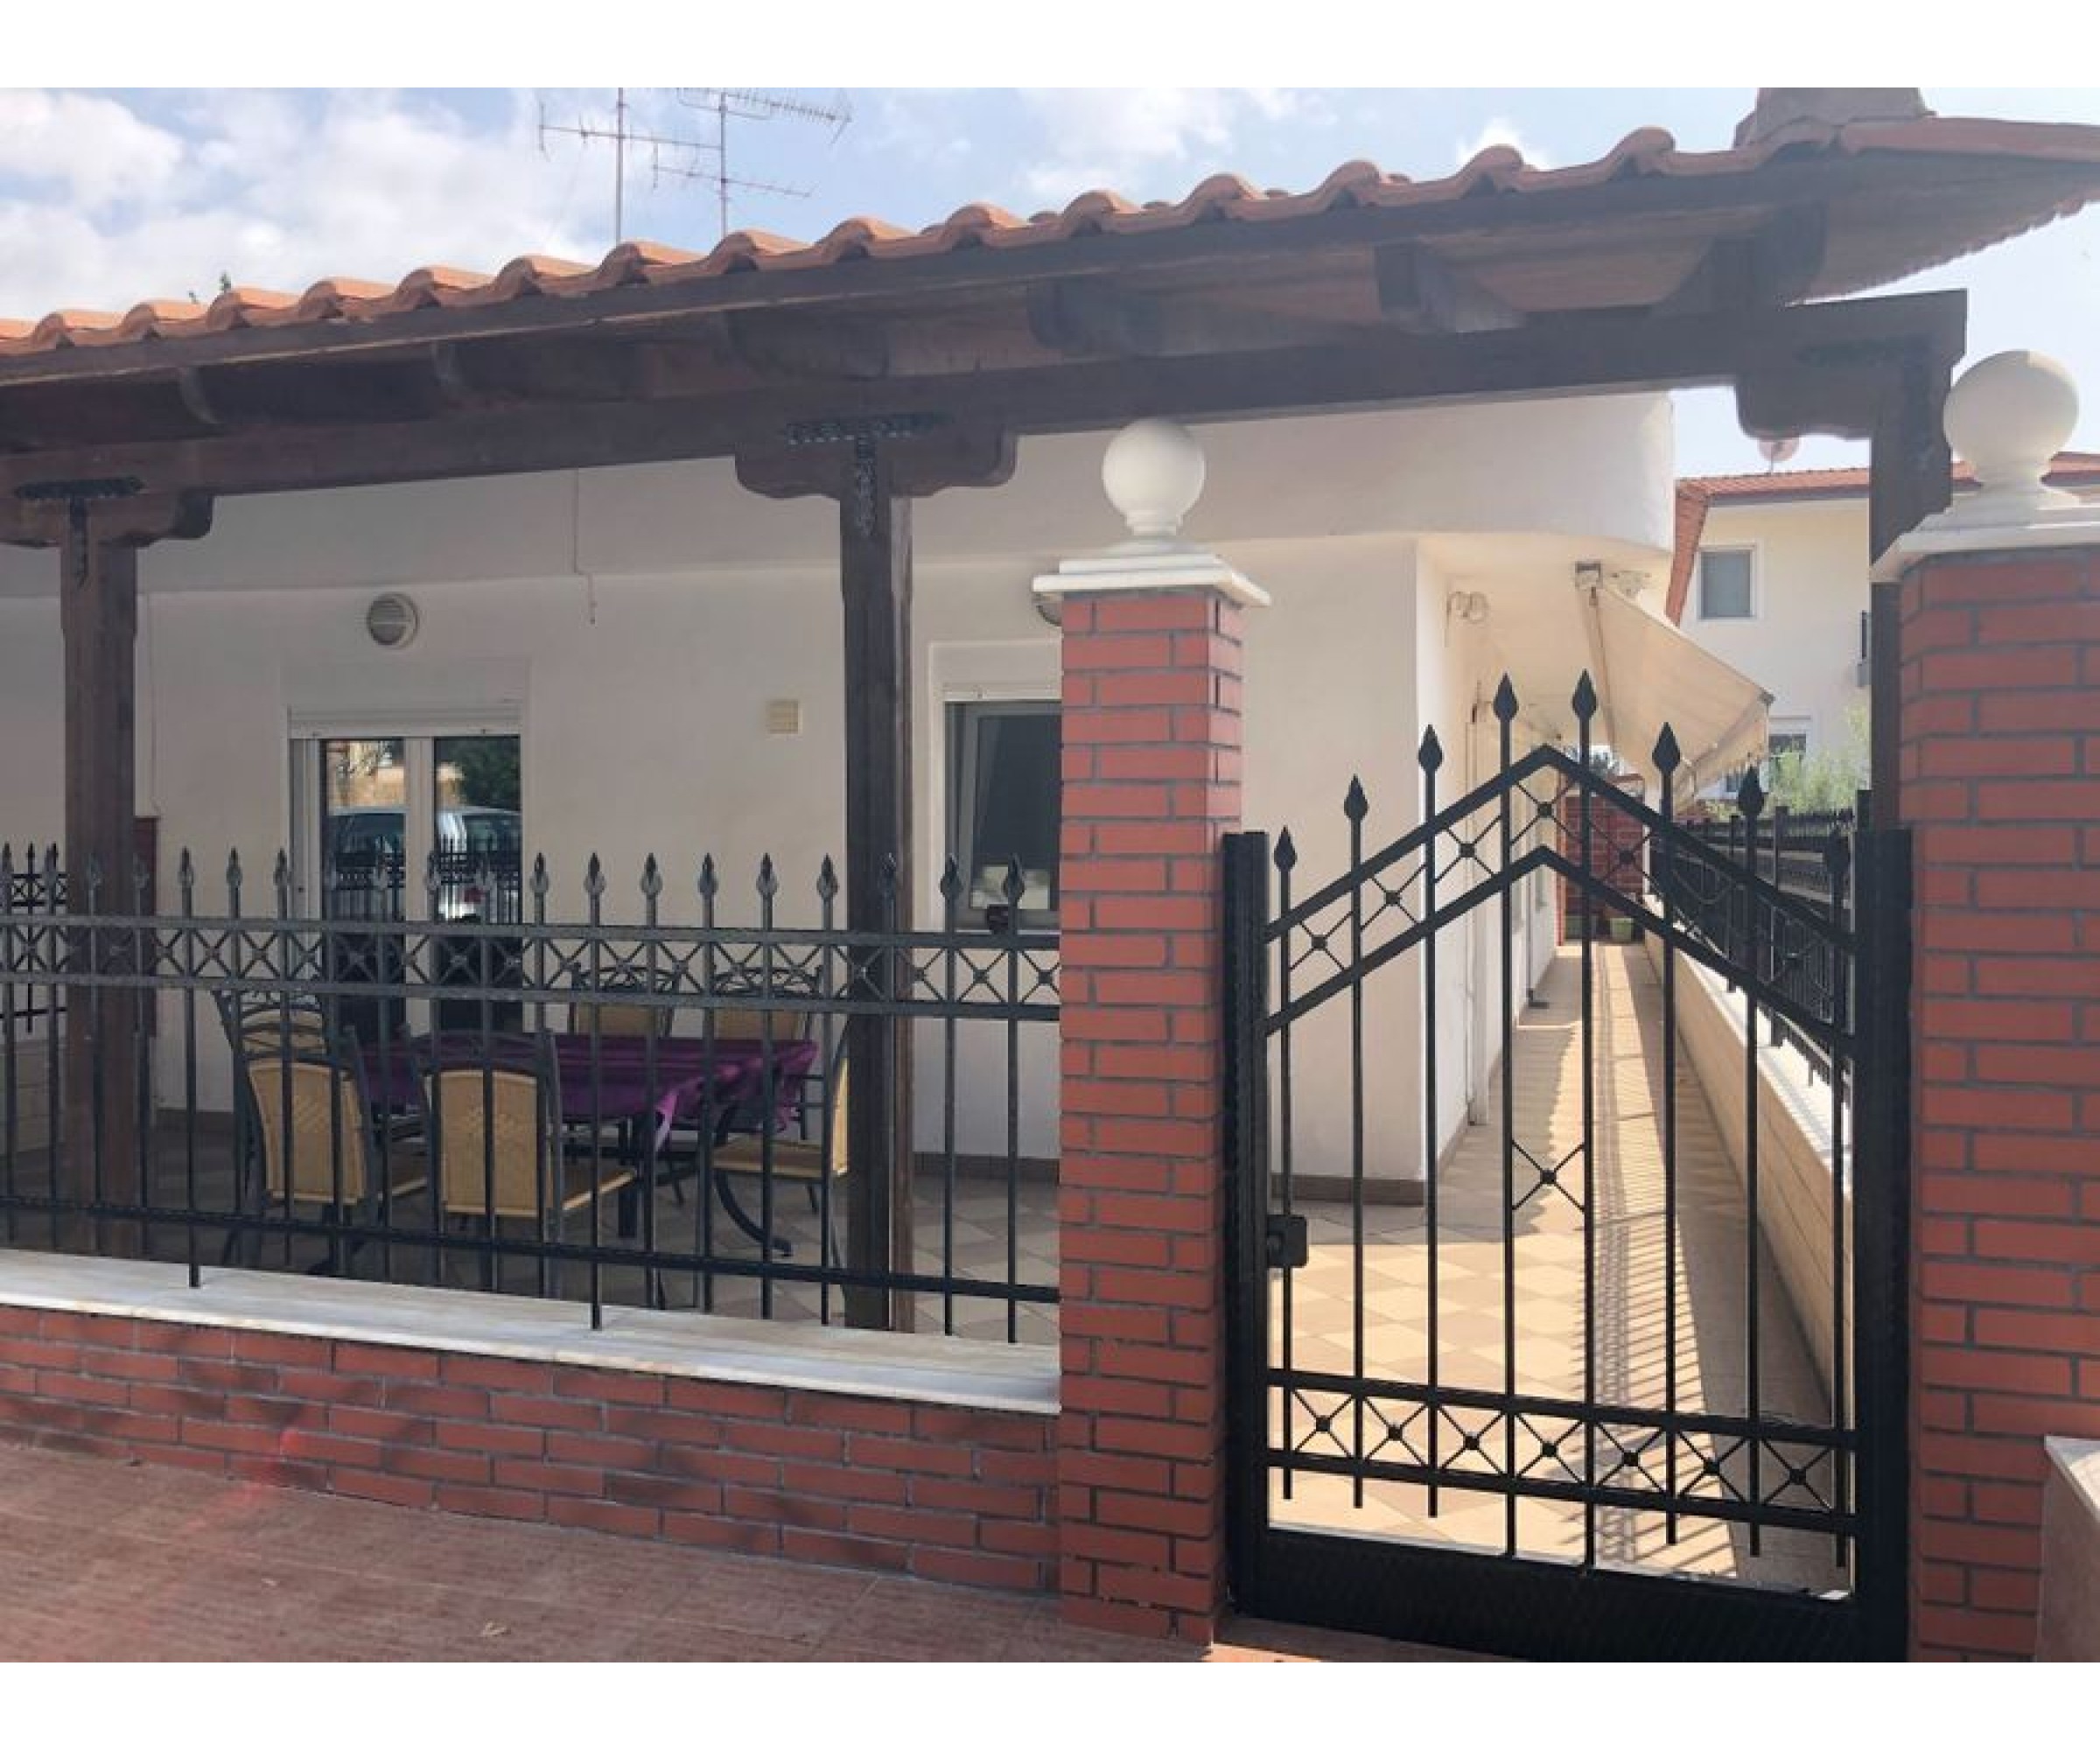 Detached House for sale in Nea Iraklia